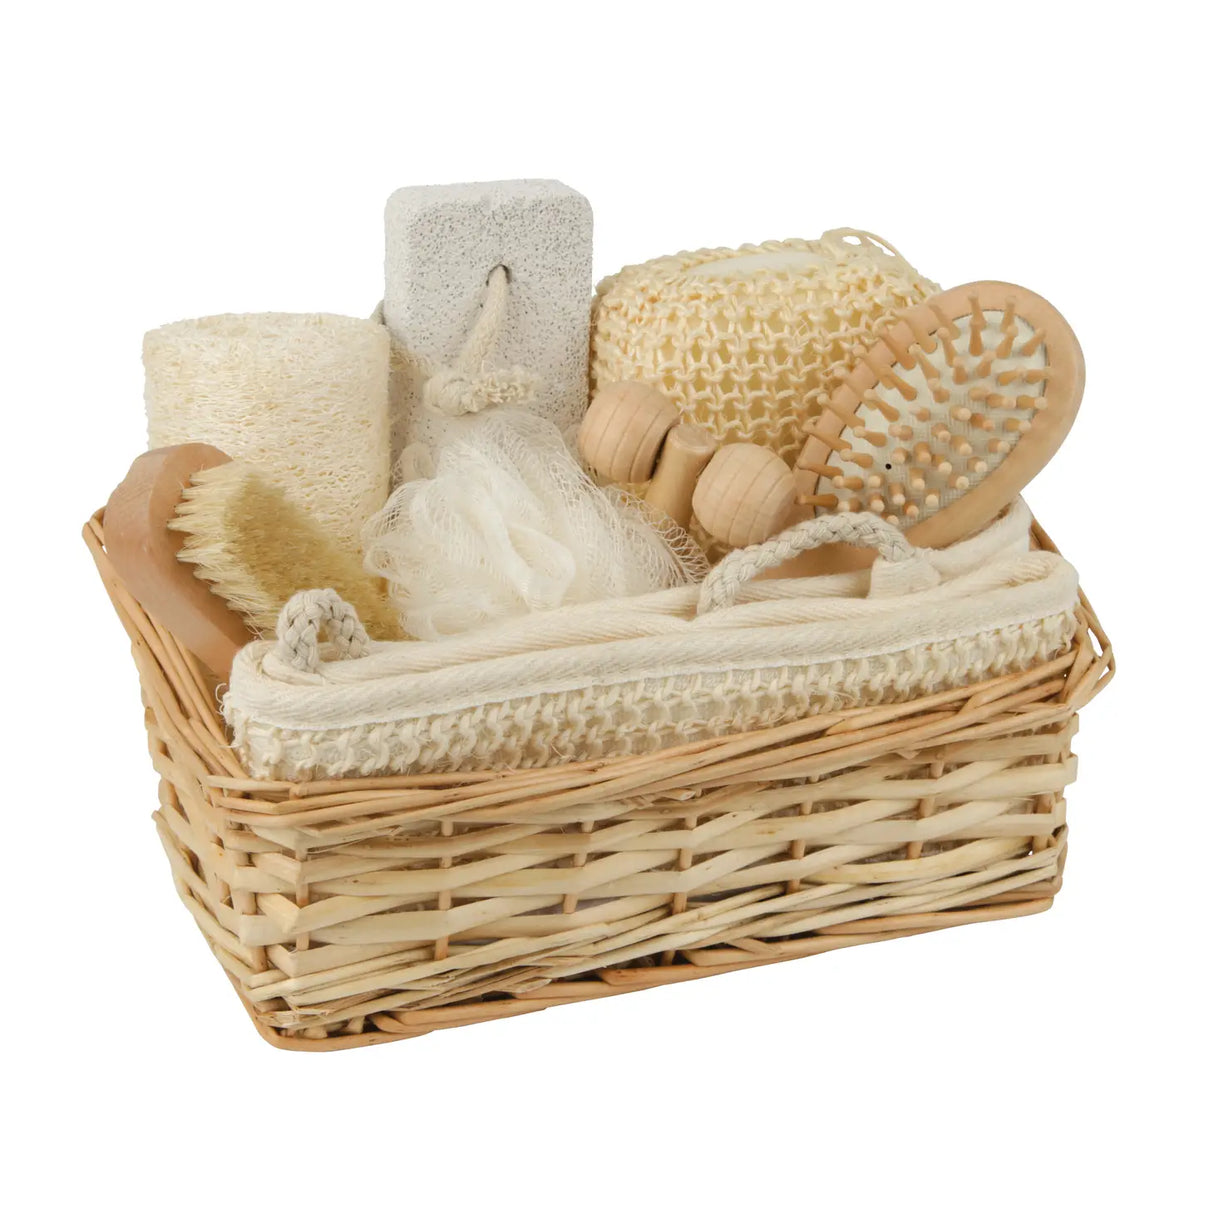 Spa Gift Set in Wicker Basket, Sustainable Wellness Gift